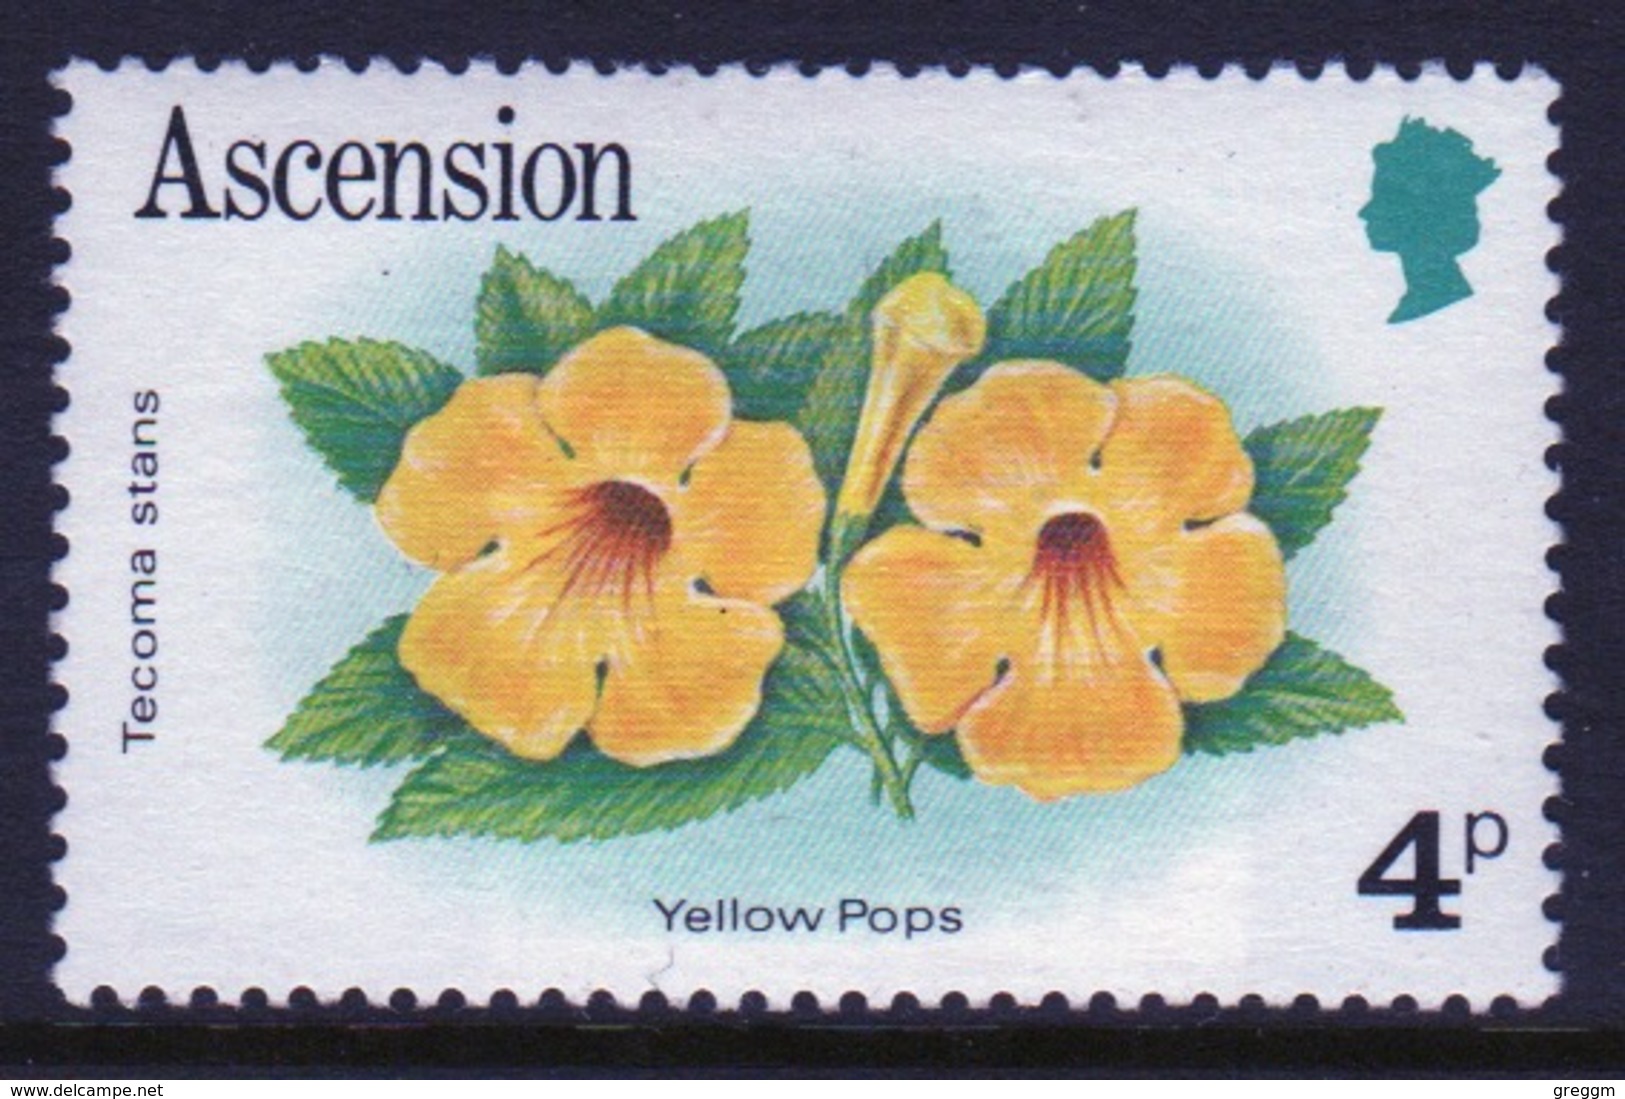 Ascension Queen Elizabeth Unmounted Mint 4p Stamp From 1981 Set On Flowers. - Ascensione